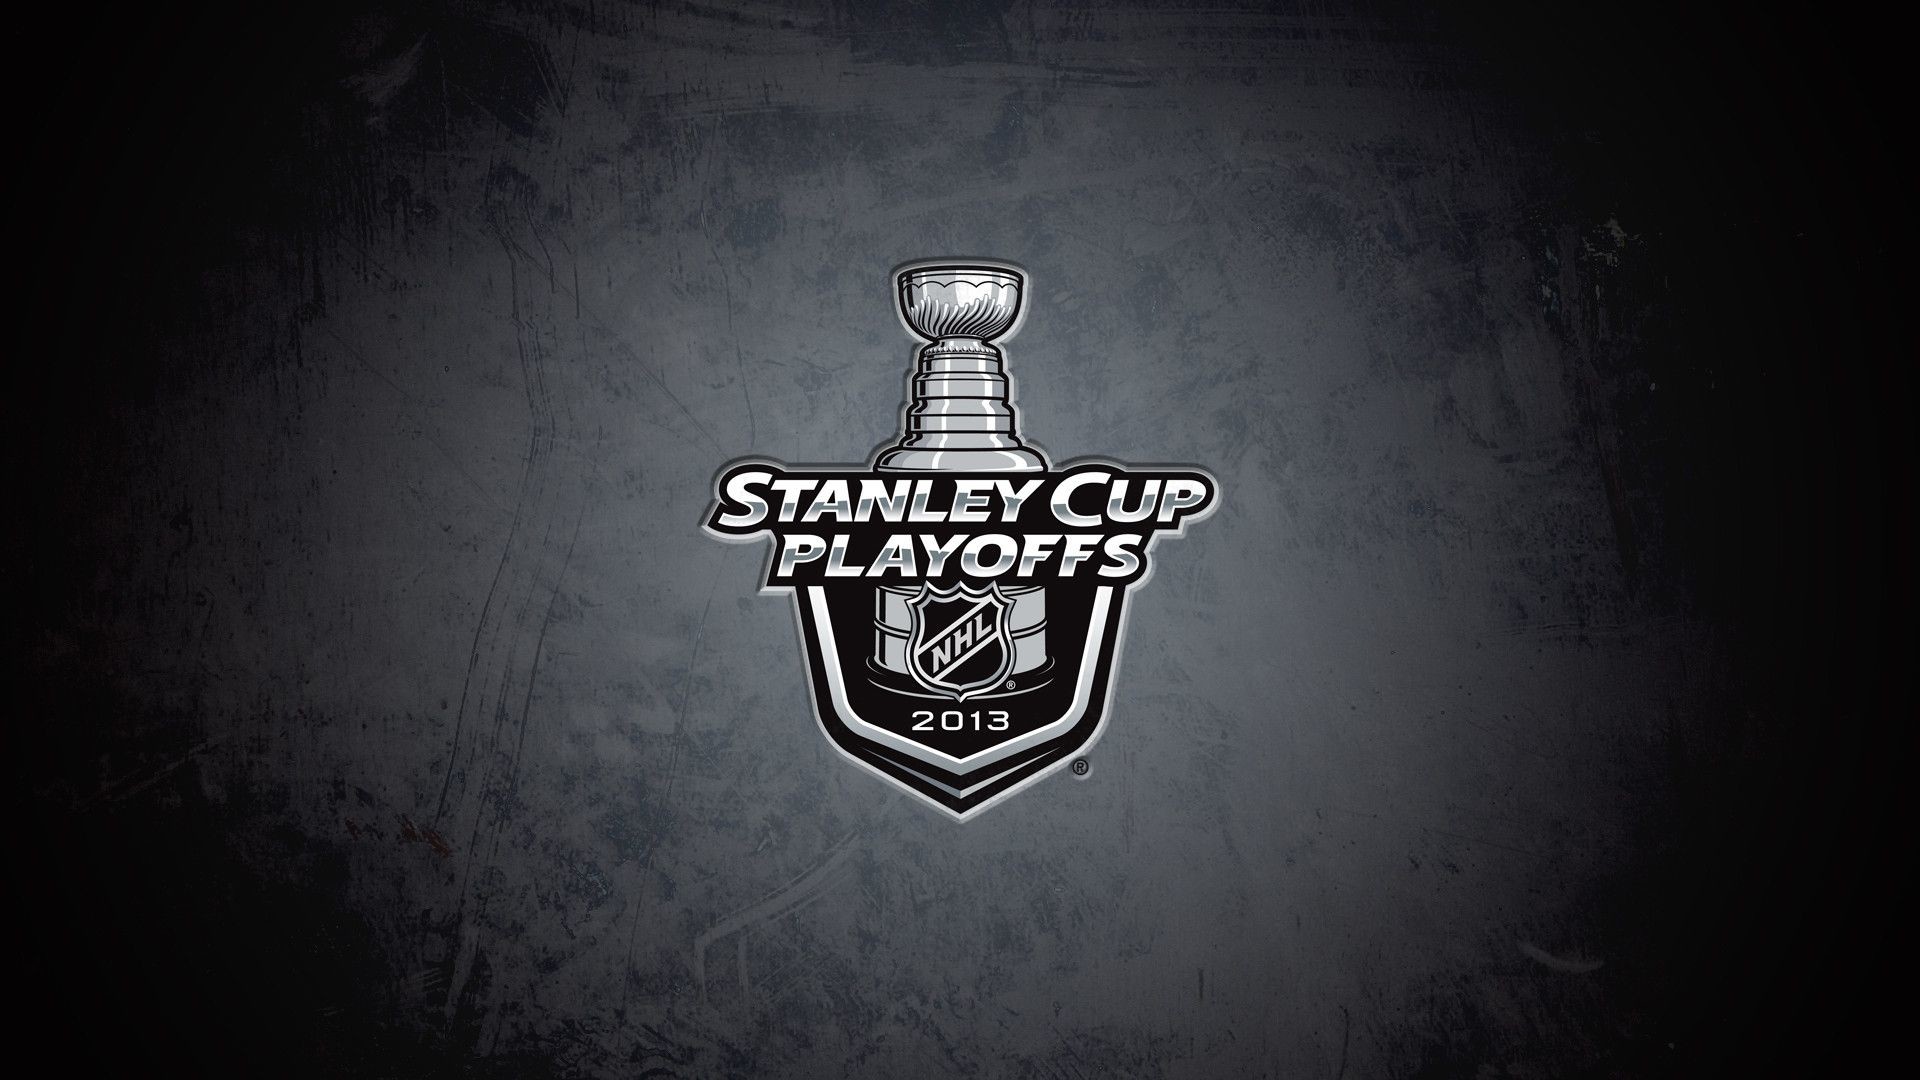 1920x1080 A simple wallpaper for the 2013 Stanley Cup Playoffs () - Imgur